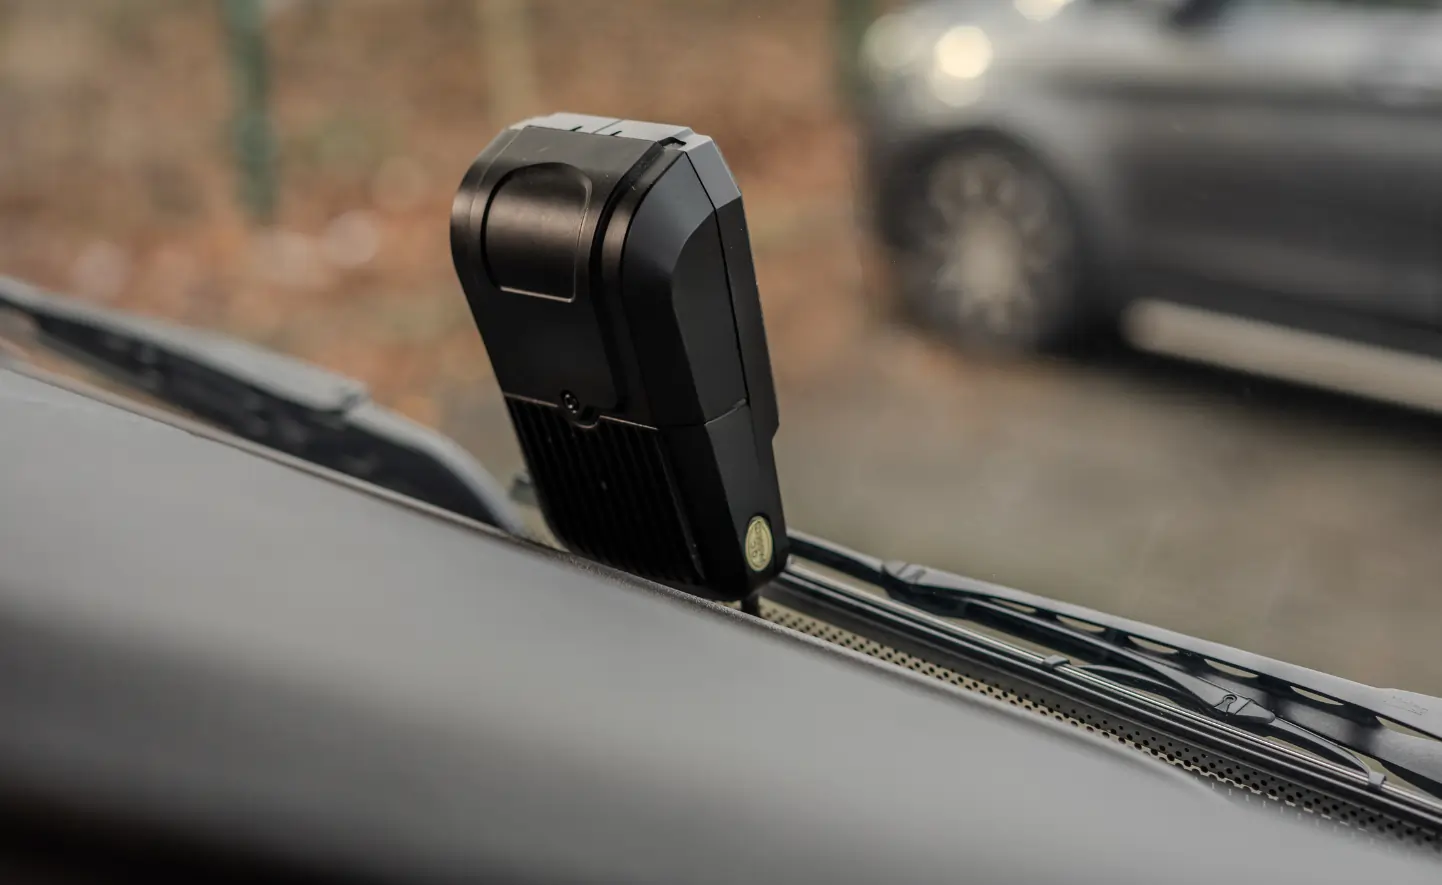 9 Reasons Why Every Fleet Should Have Dash Cams Fitted to Their Vehicles